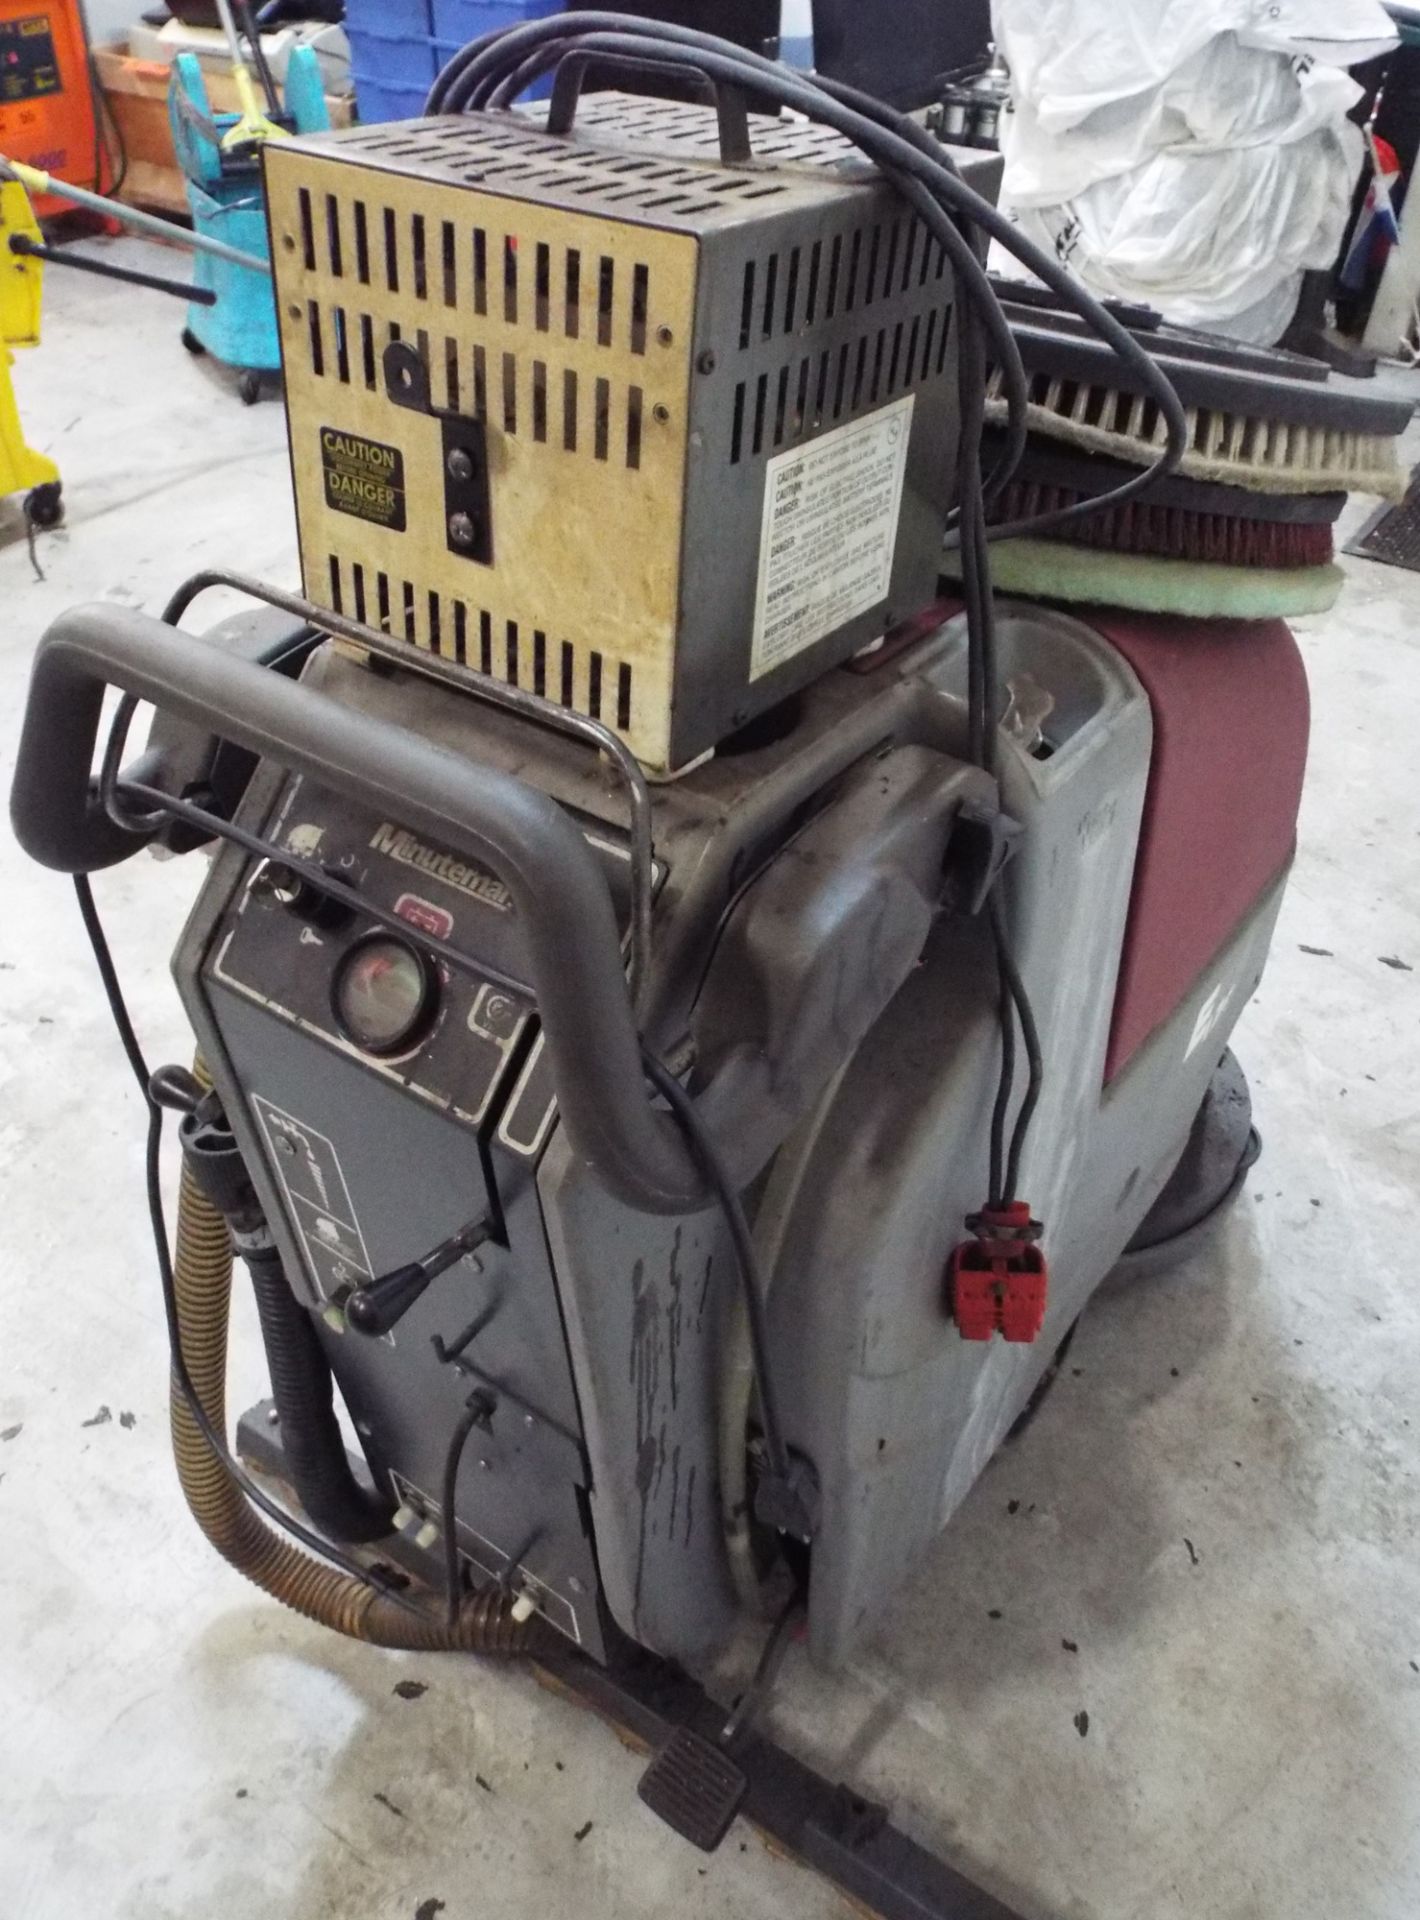 LOT/ MINUTEMAN E17 & 200 FLOOR SCRUBBERS WITH CHARGER & ACCESSORIES (NOT IN SERVICE) - Image 2 of 6